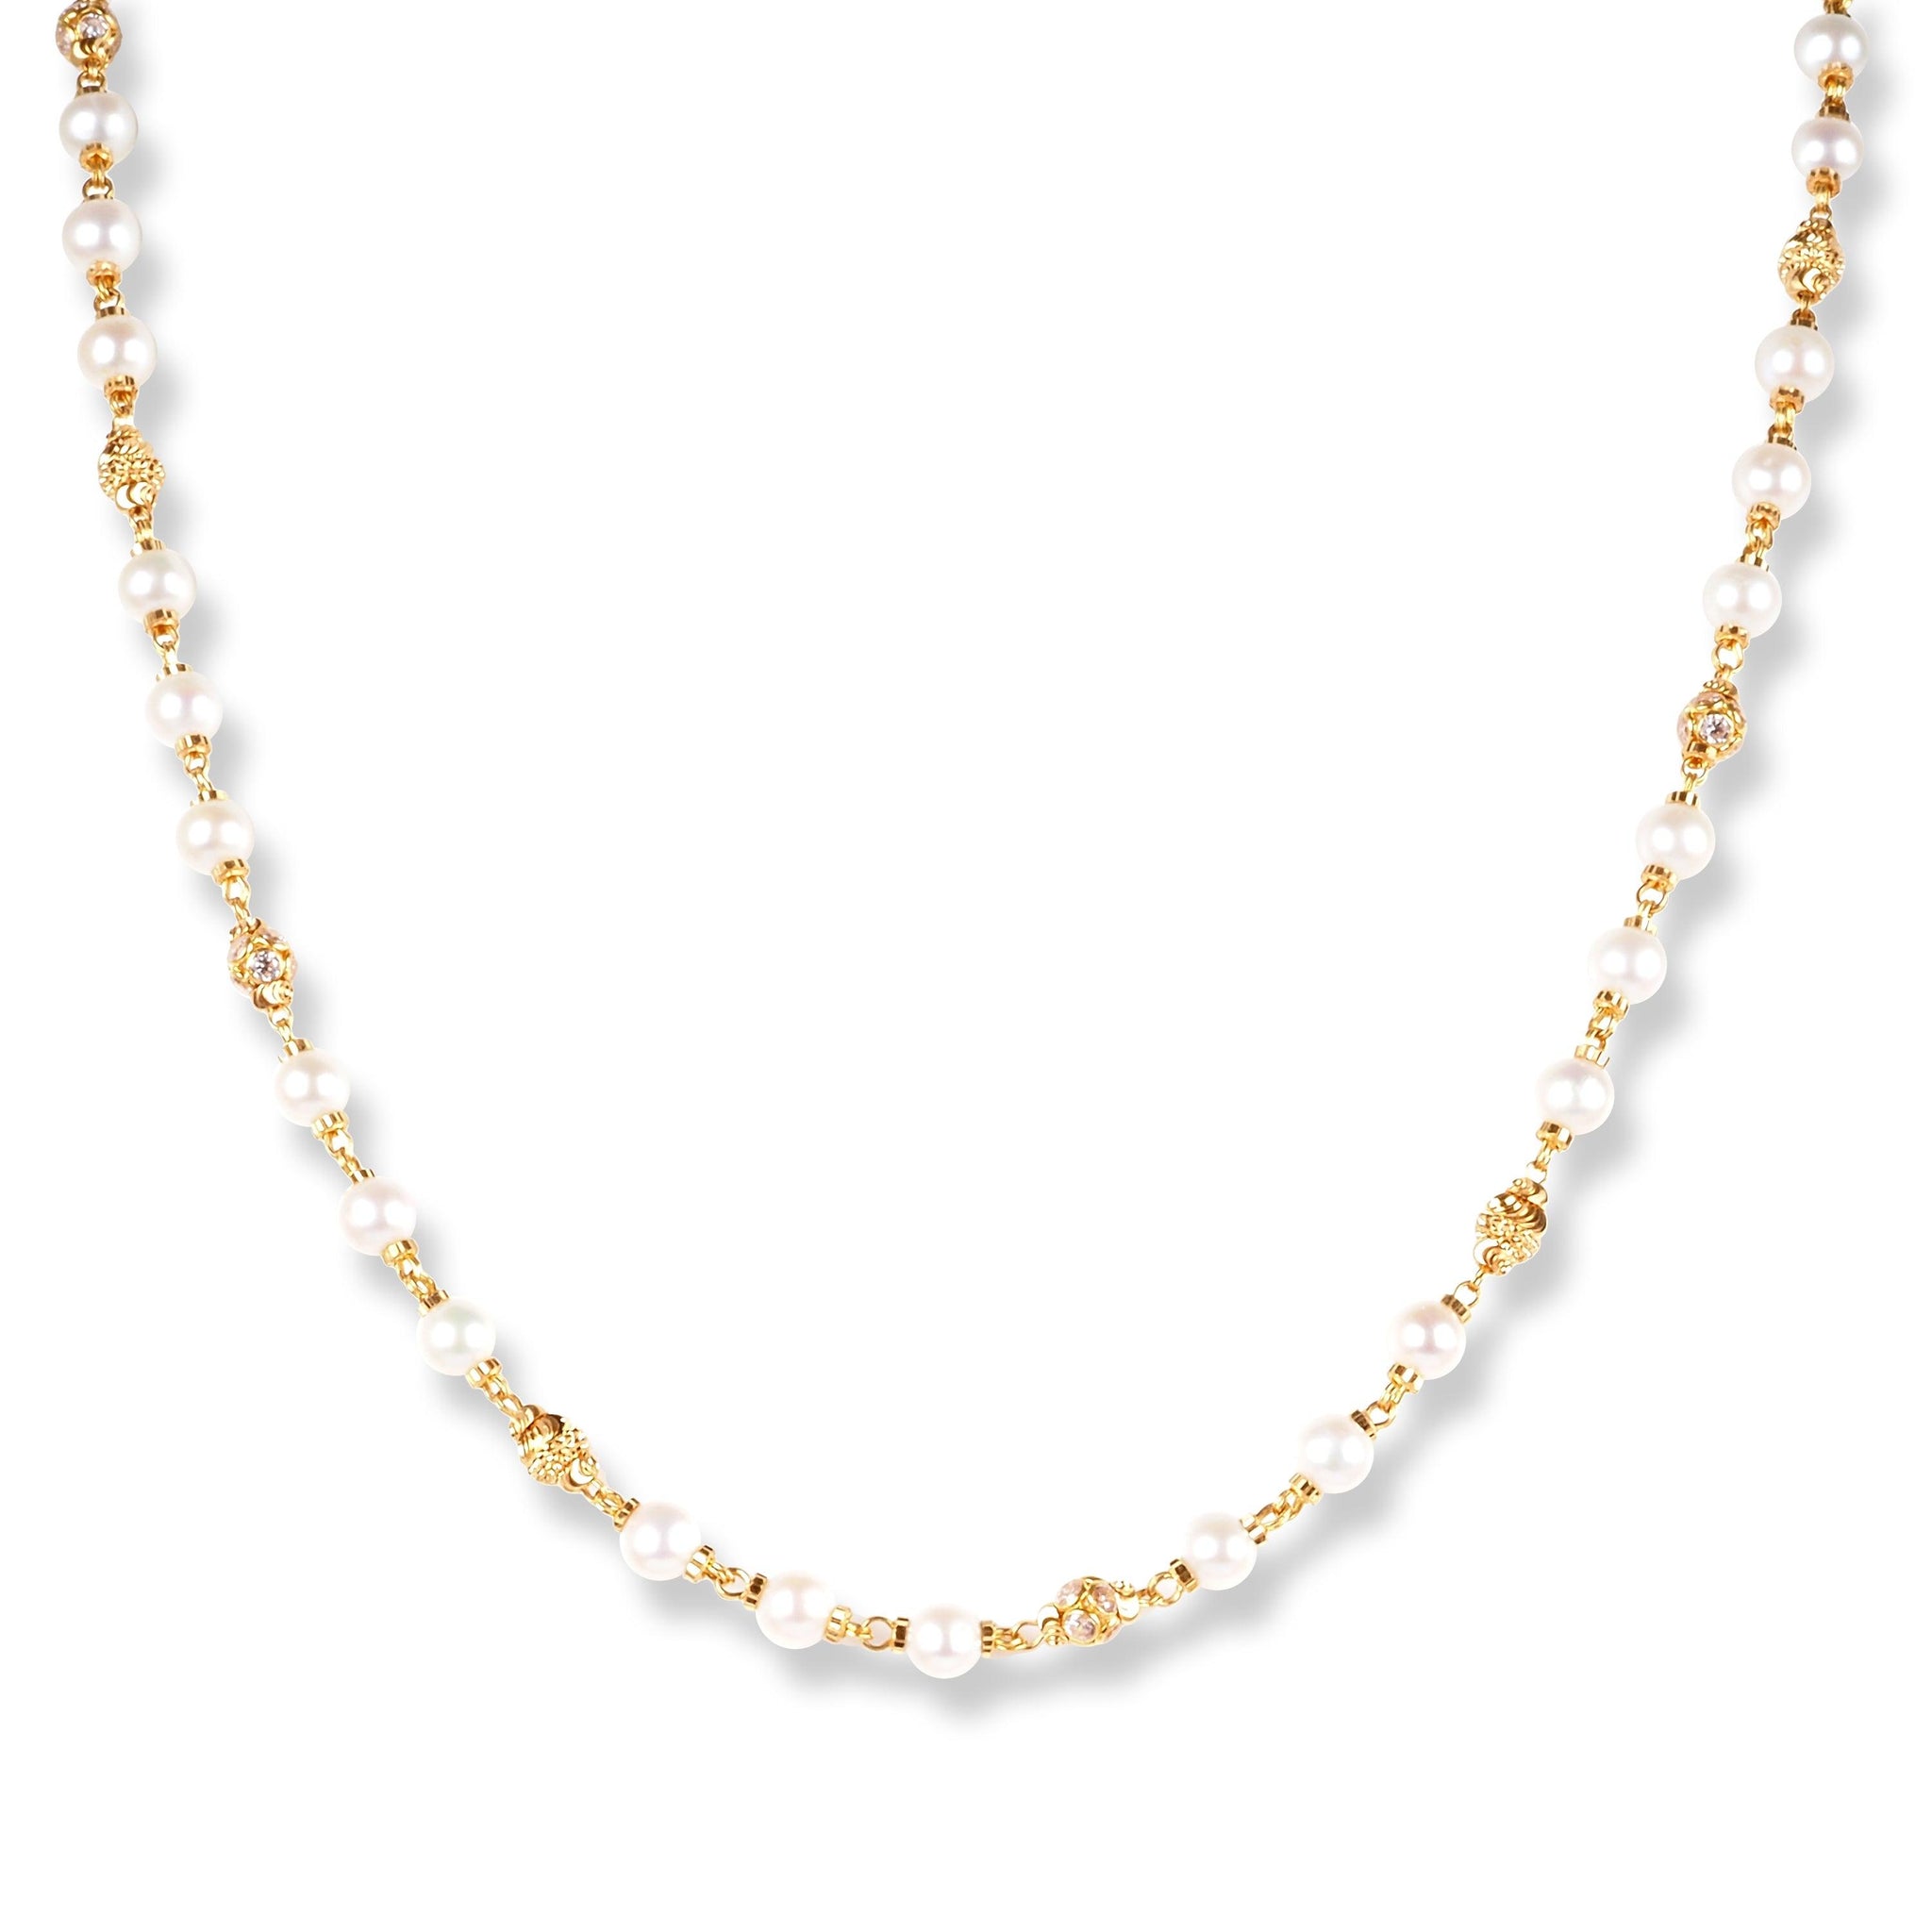 22ct Gold Necklace with Pearls, Cubic Zirconia Stones & Diamond Cut Beads N-7892